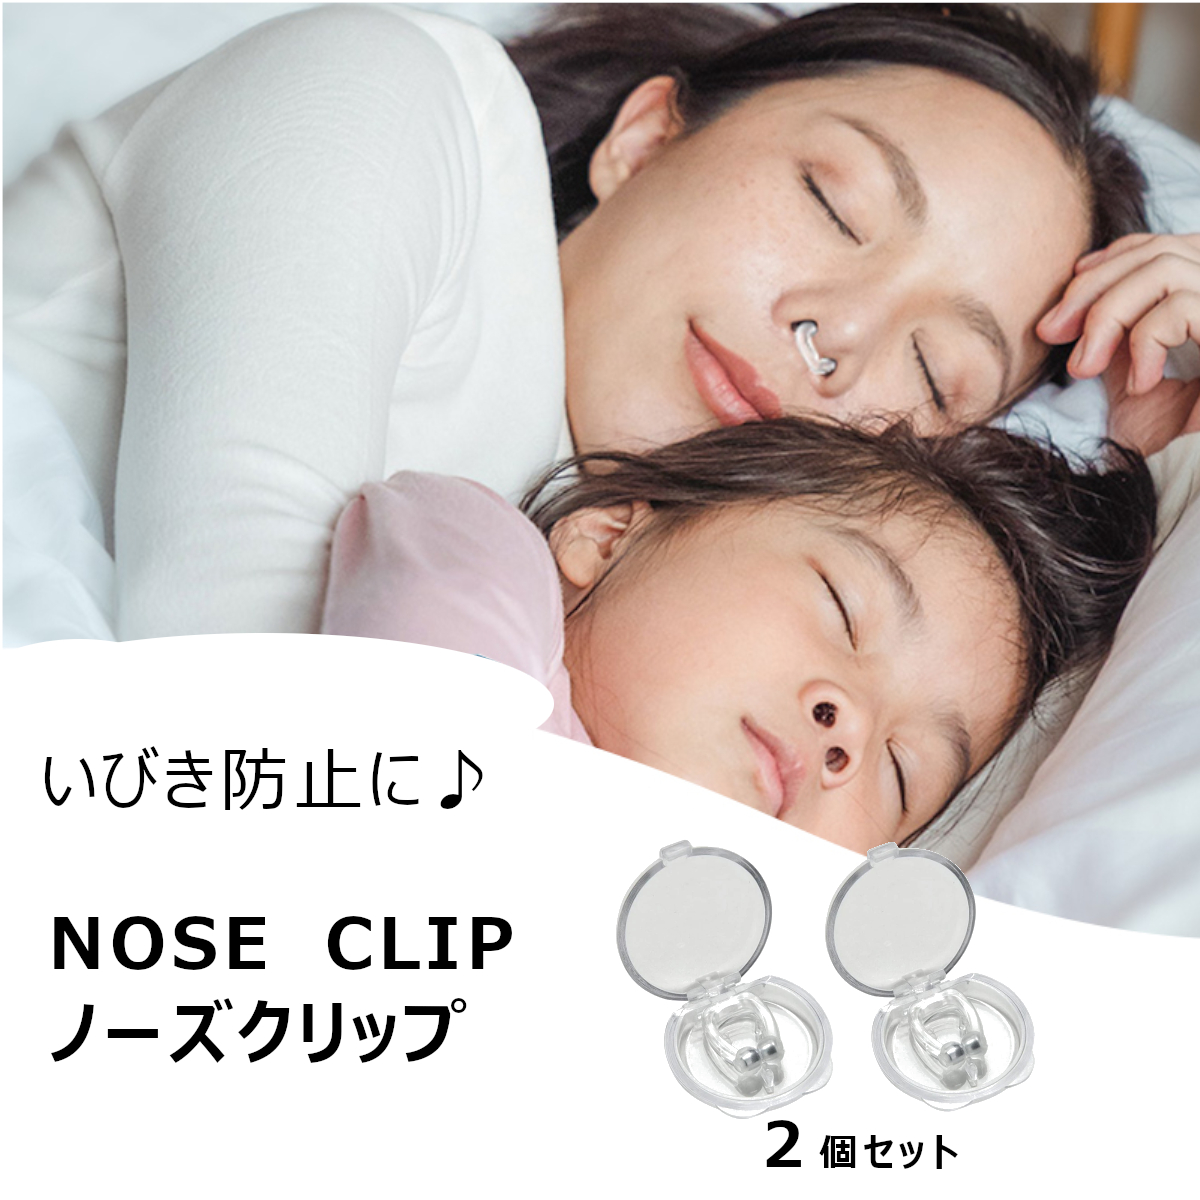  snoring prevention nose clip nose pin .. person magnet goods sleeping nose .. nose ... nose . enlargement measures reduction 